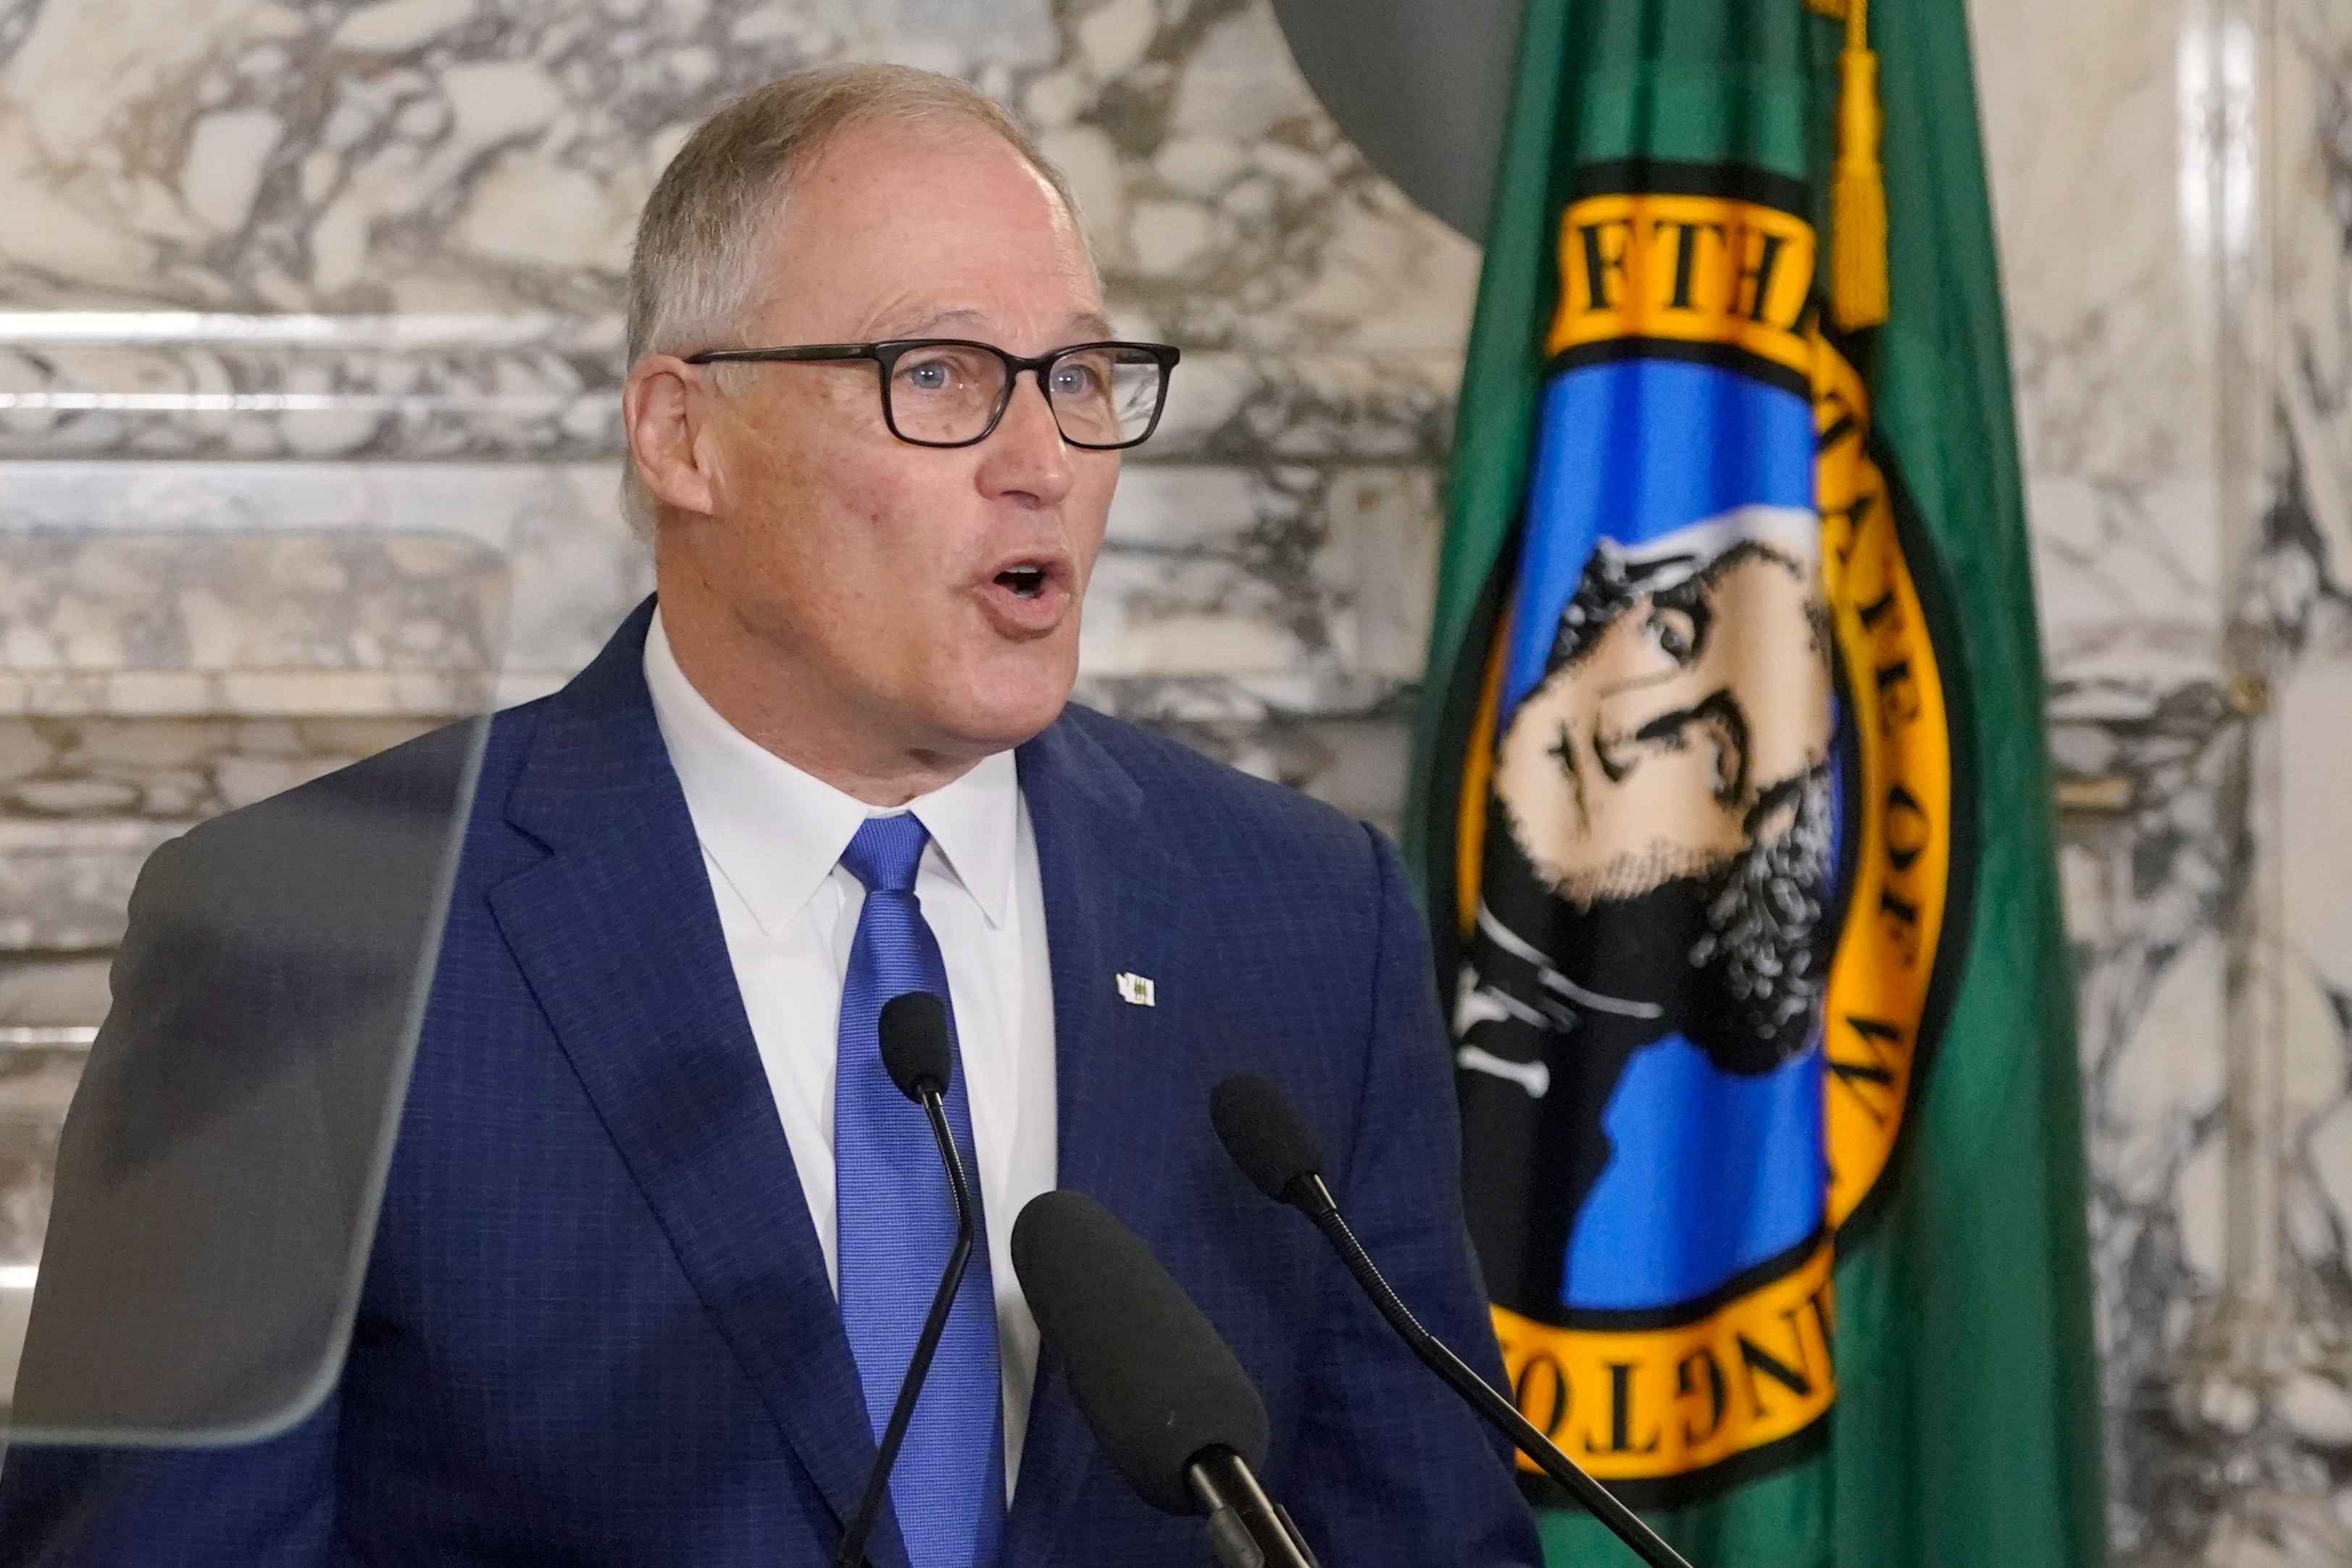 Culp lost to Democrat Jay Inslee by more than 500,000 in bid to be governor